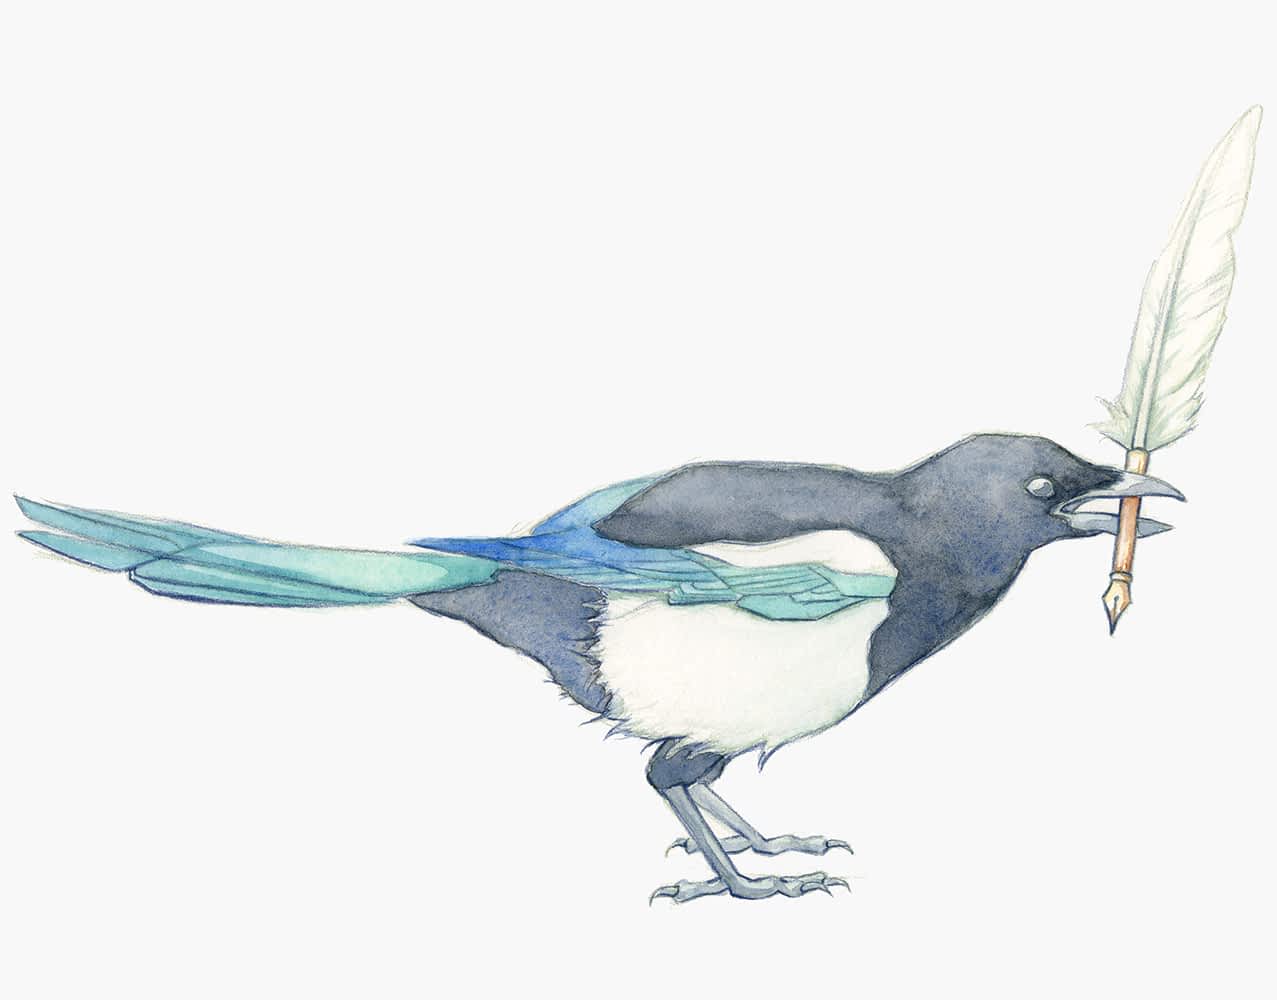 Magpie holding a quill